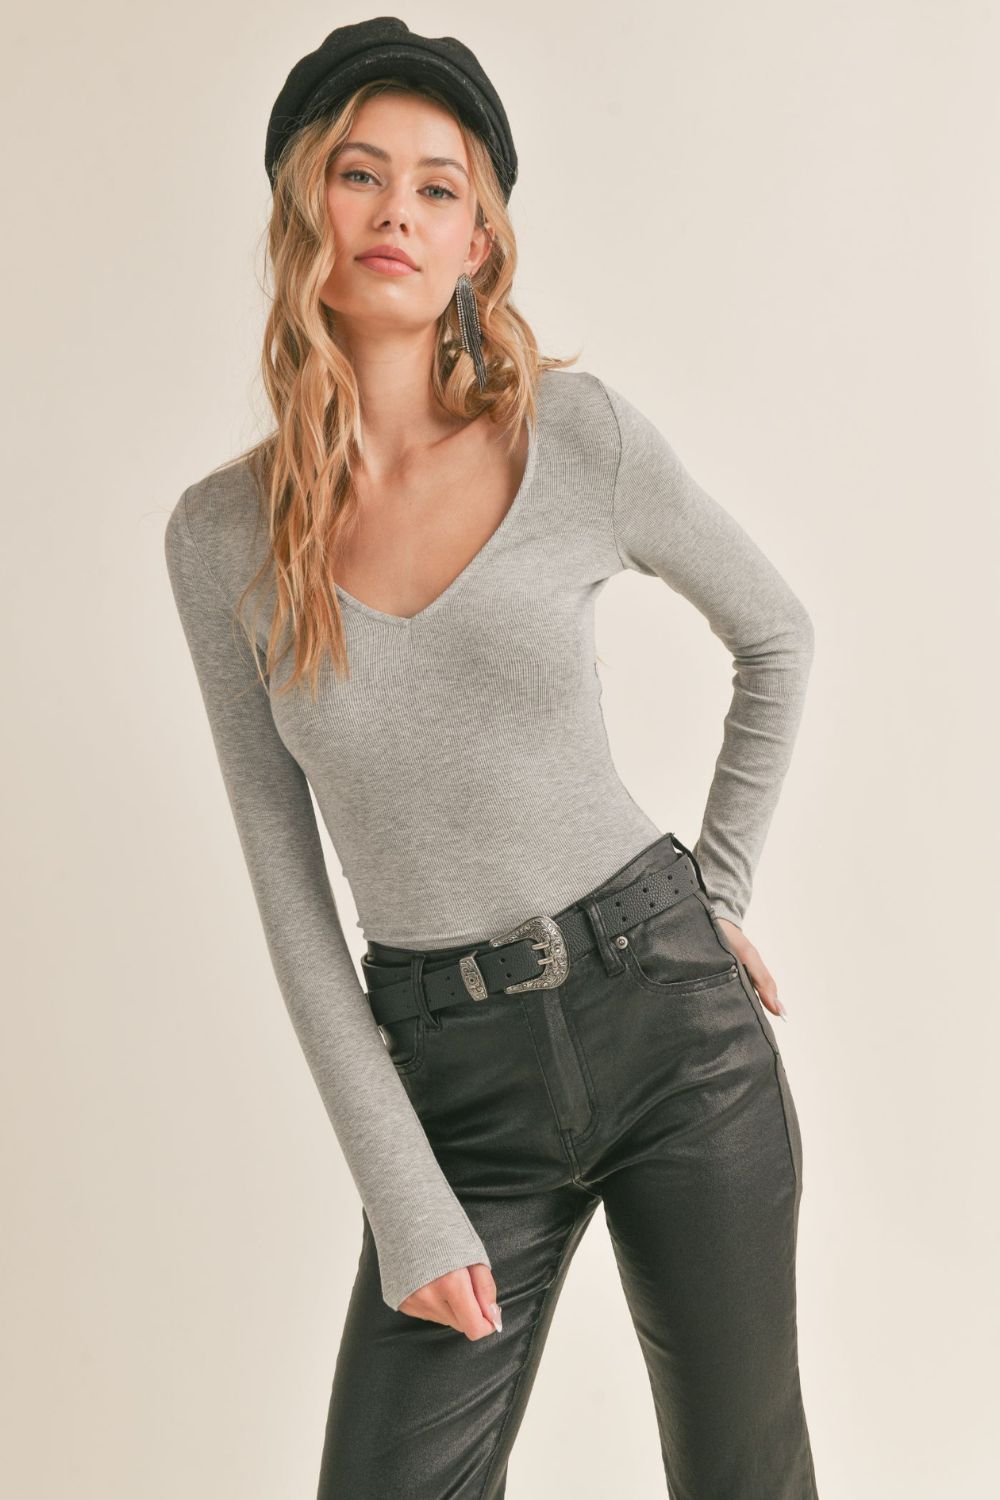 Women&#39;s Basic Baby Rib Knit Long Sleeve Top | Heather Gray - Women&#39;s Shirts &amp; Tops - Blooming Daily